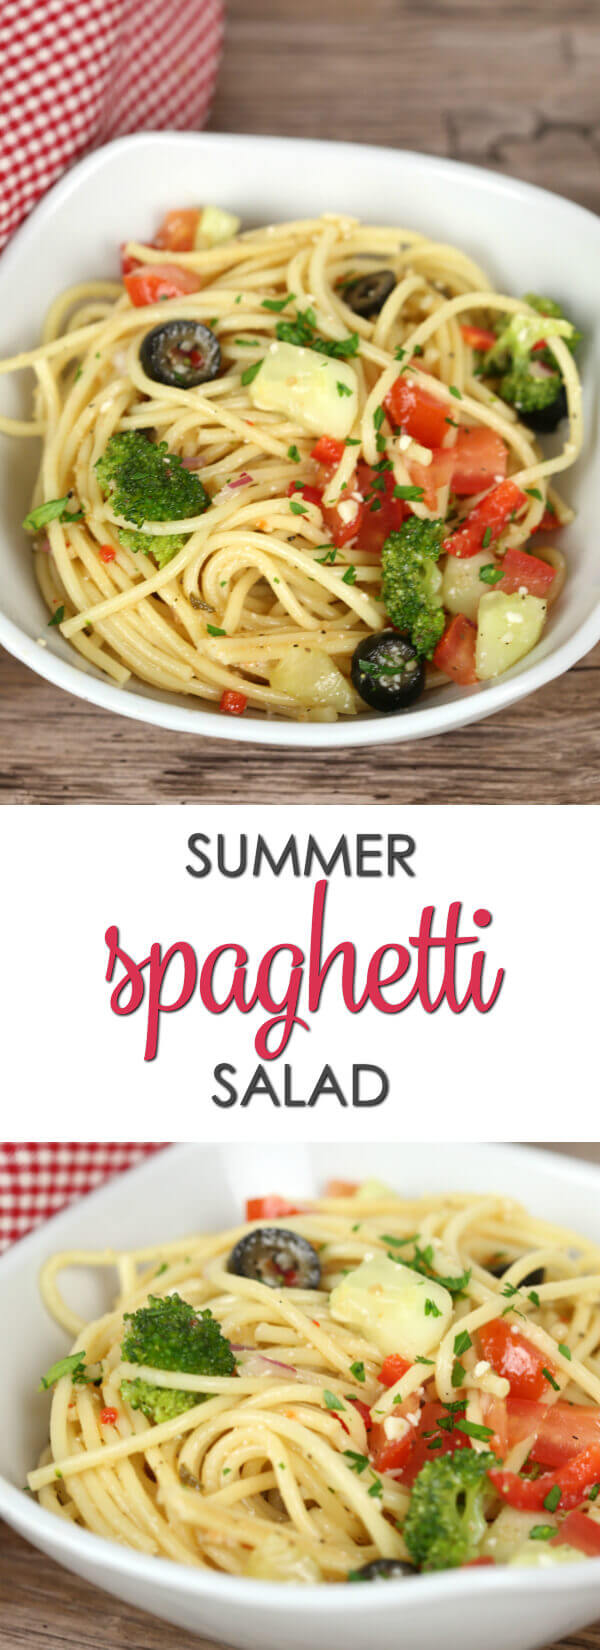 Summer Spaghetti Salad recipe - This easy side dish is full of veggies and flavor. It's one of my go-to cookout recipes and gets devoured in minutes.